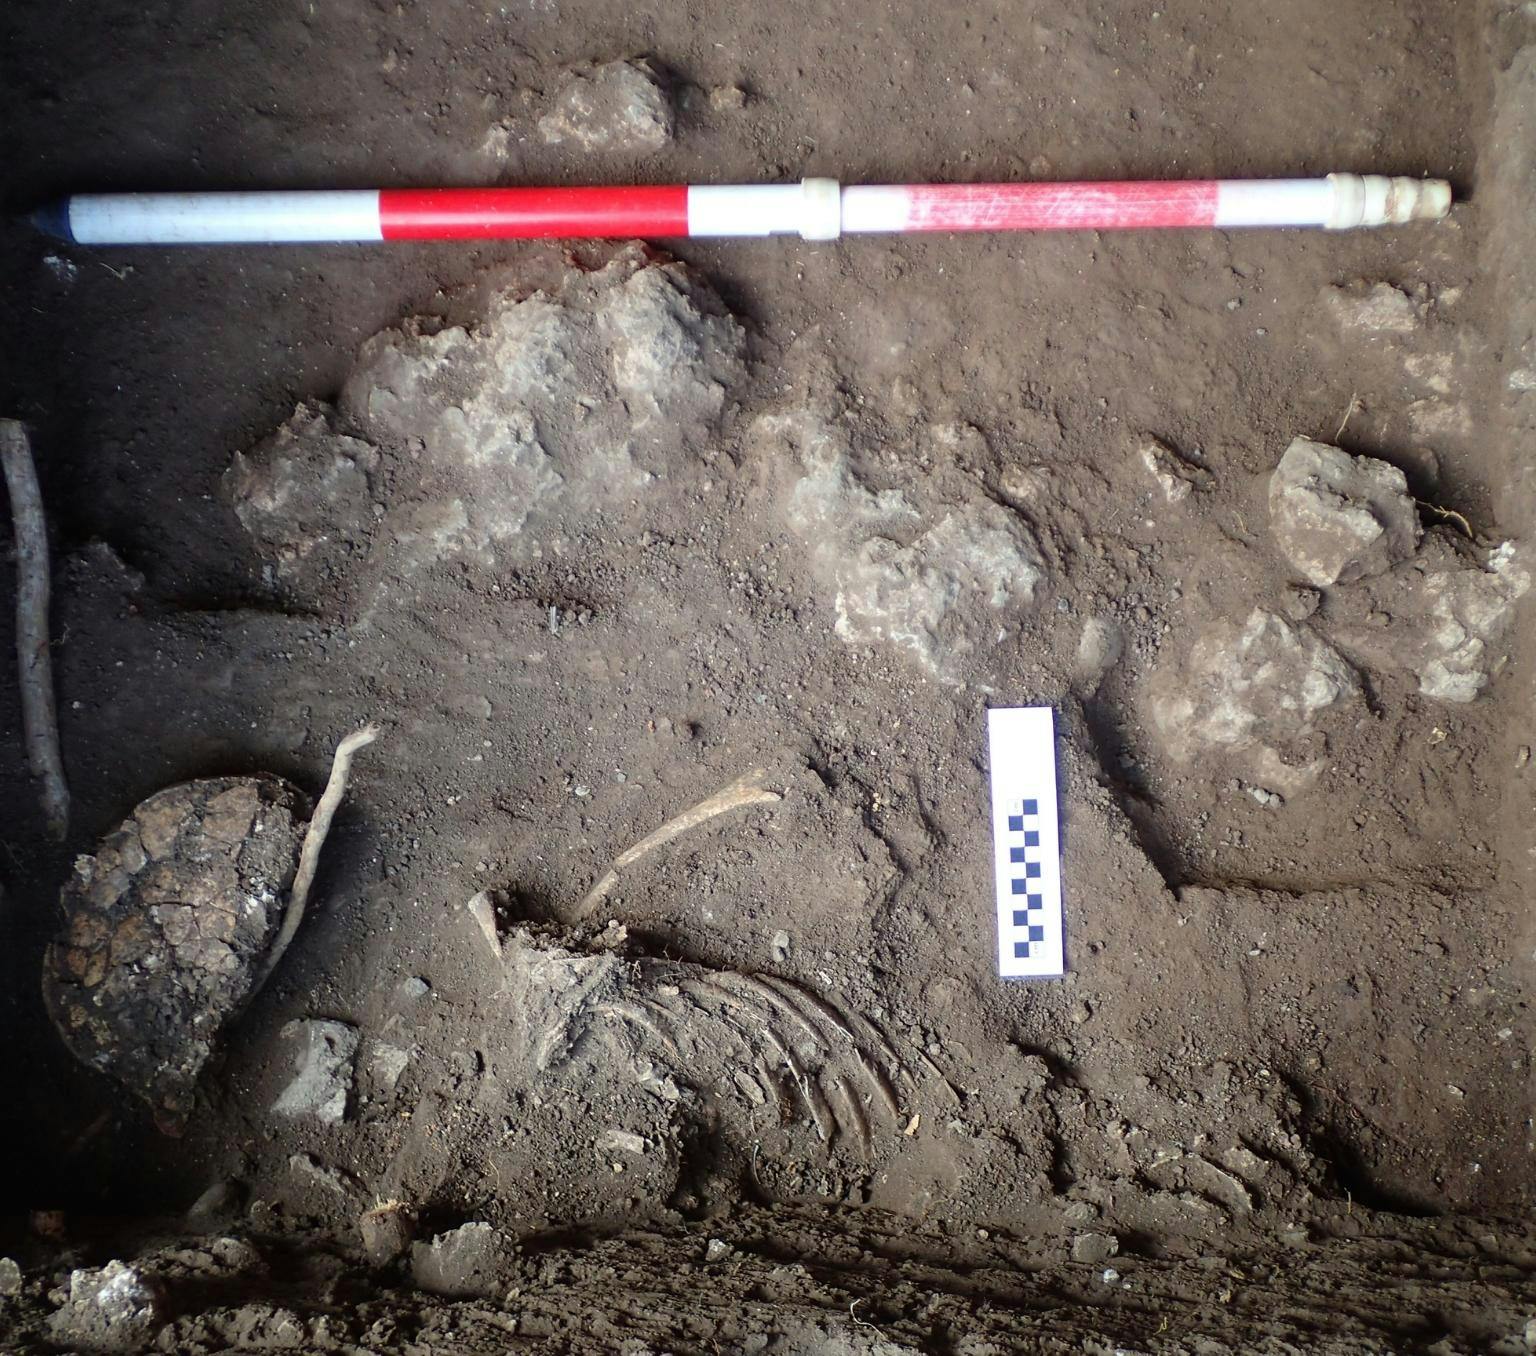 Human remains unearthed in the dirt at Jareng Bori rockshelter in Pantar island. Human bones are visible in the dirt. Excavation equipment is also laid out in the dirt around the bones.